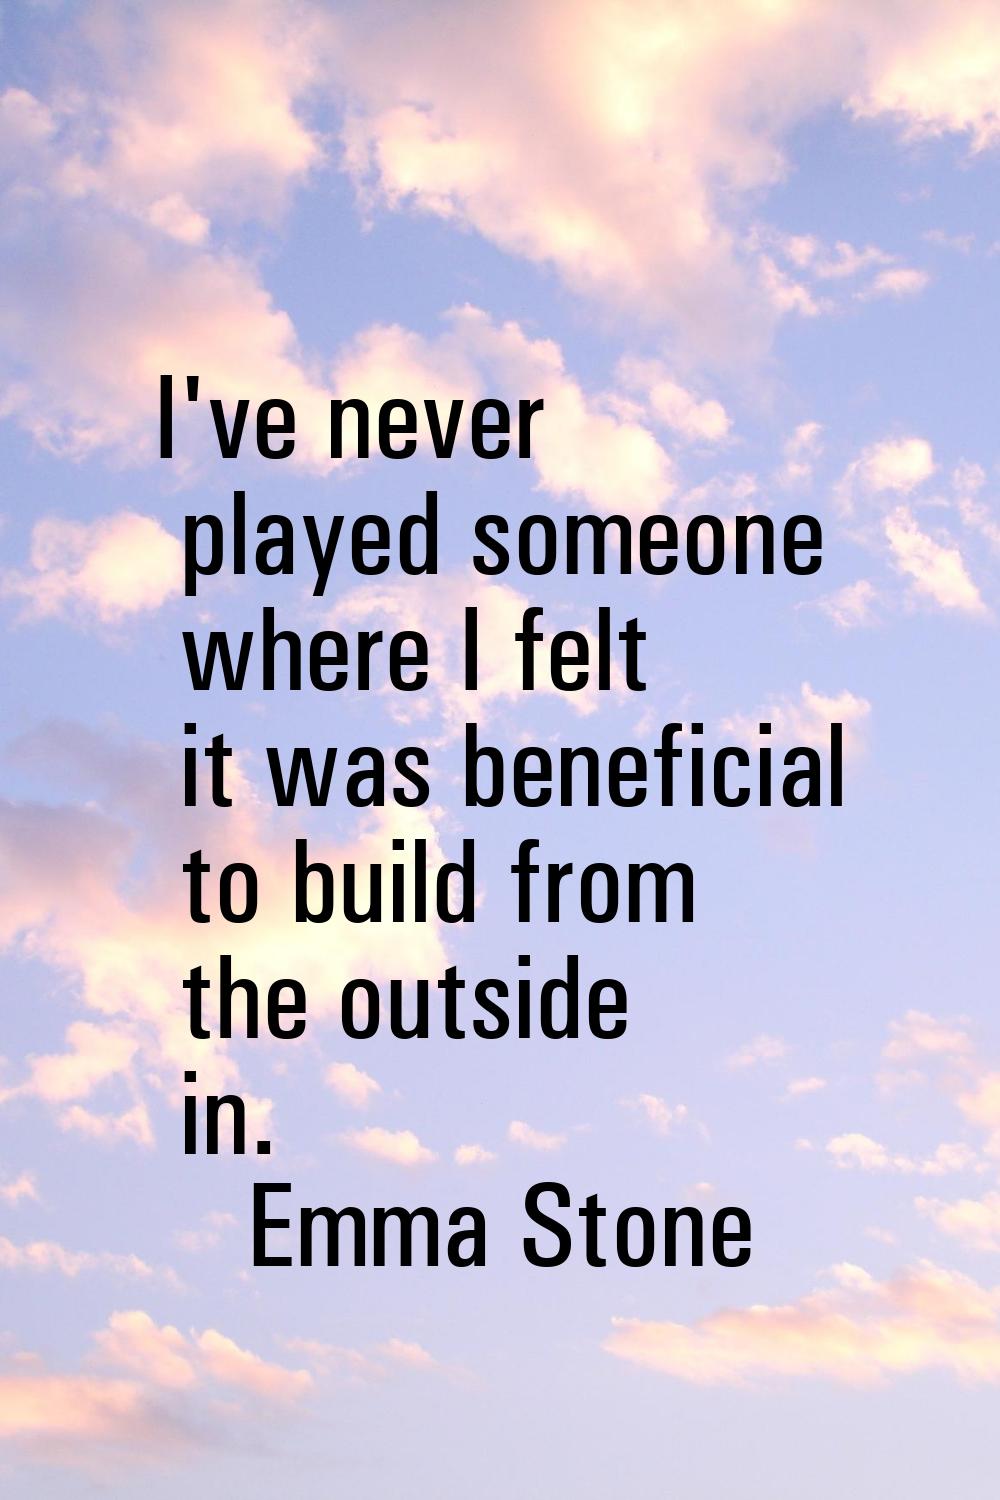 I've never played someone where I felt it was beneficial to build from the outside in.